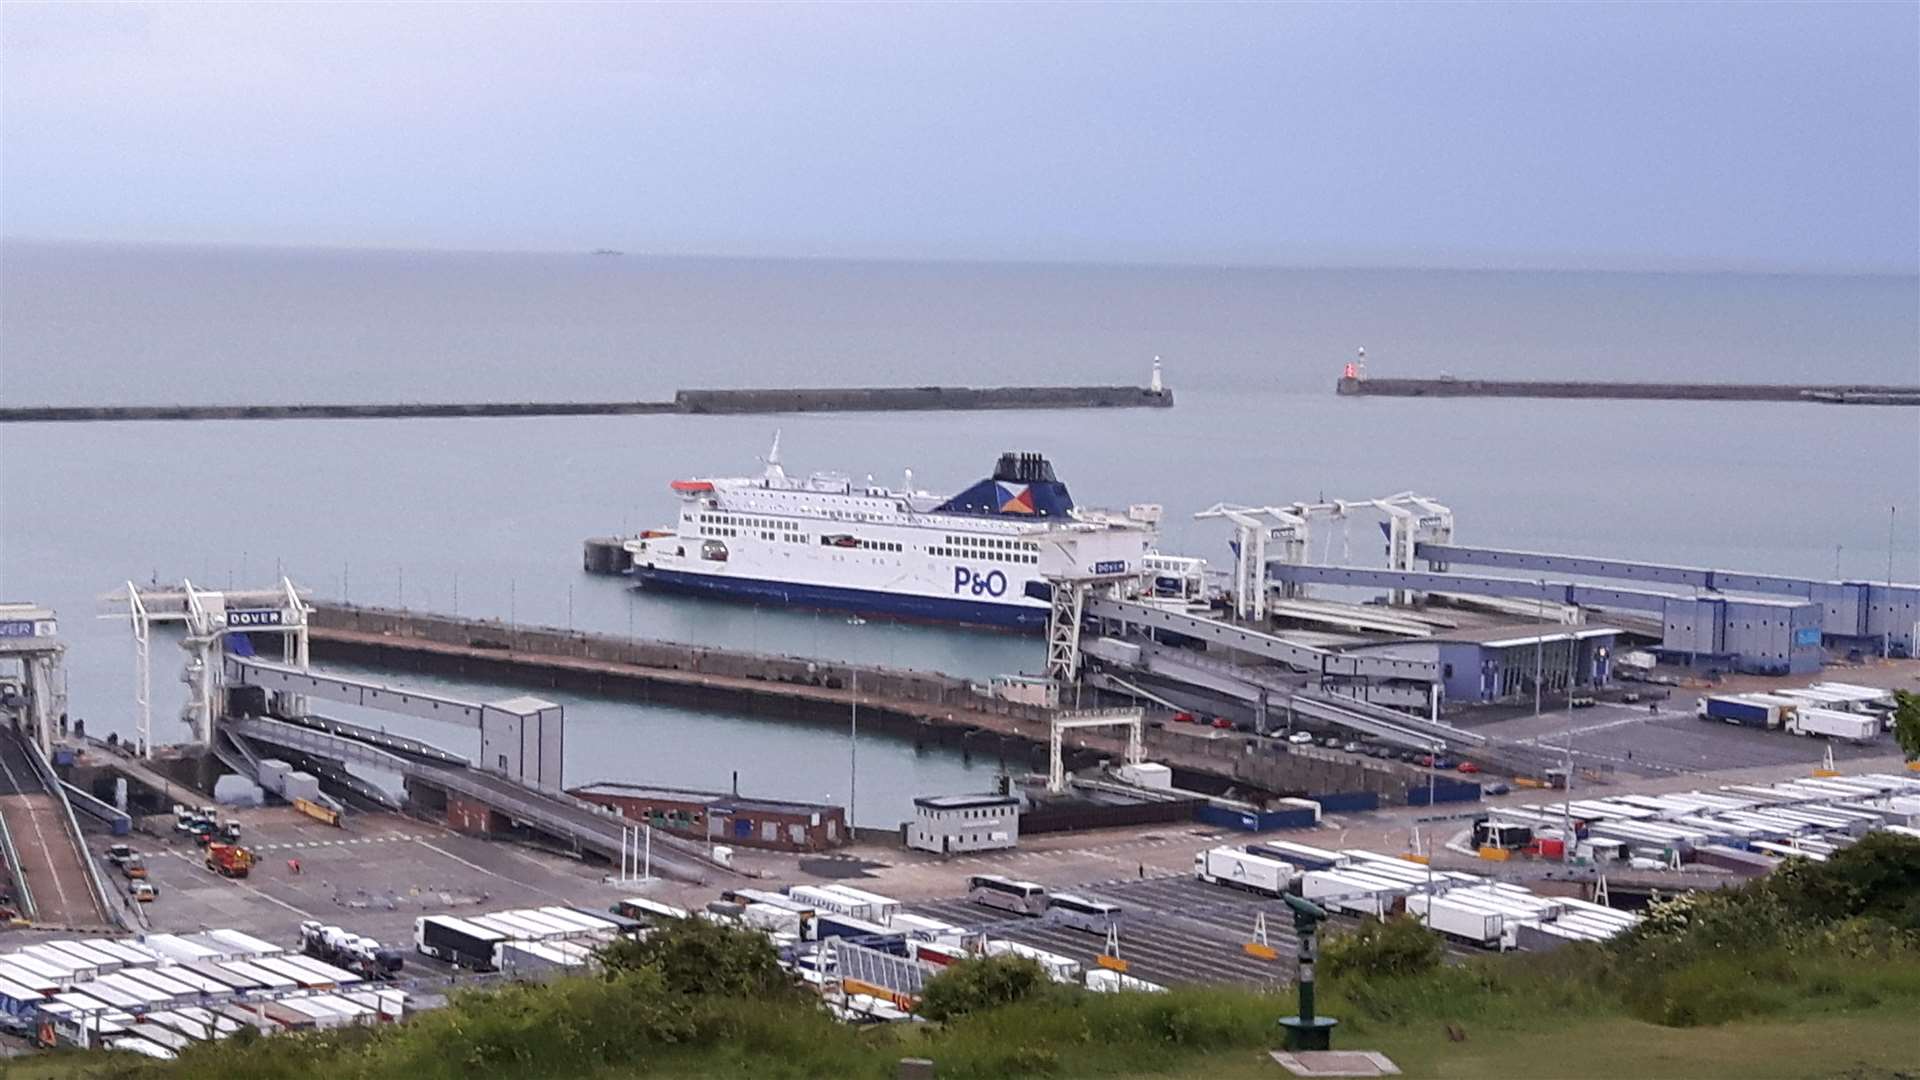 Port of Dover. (7326870)